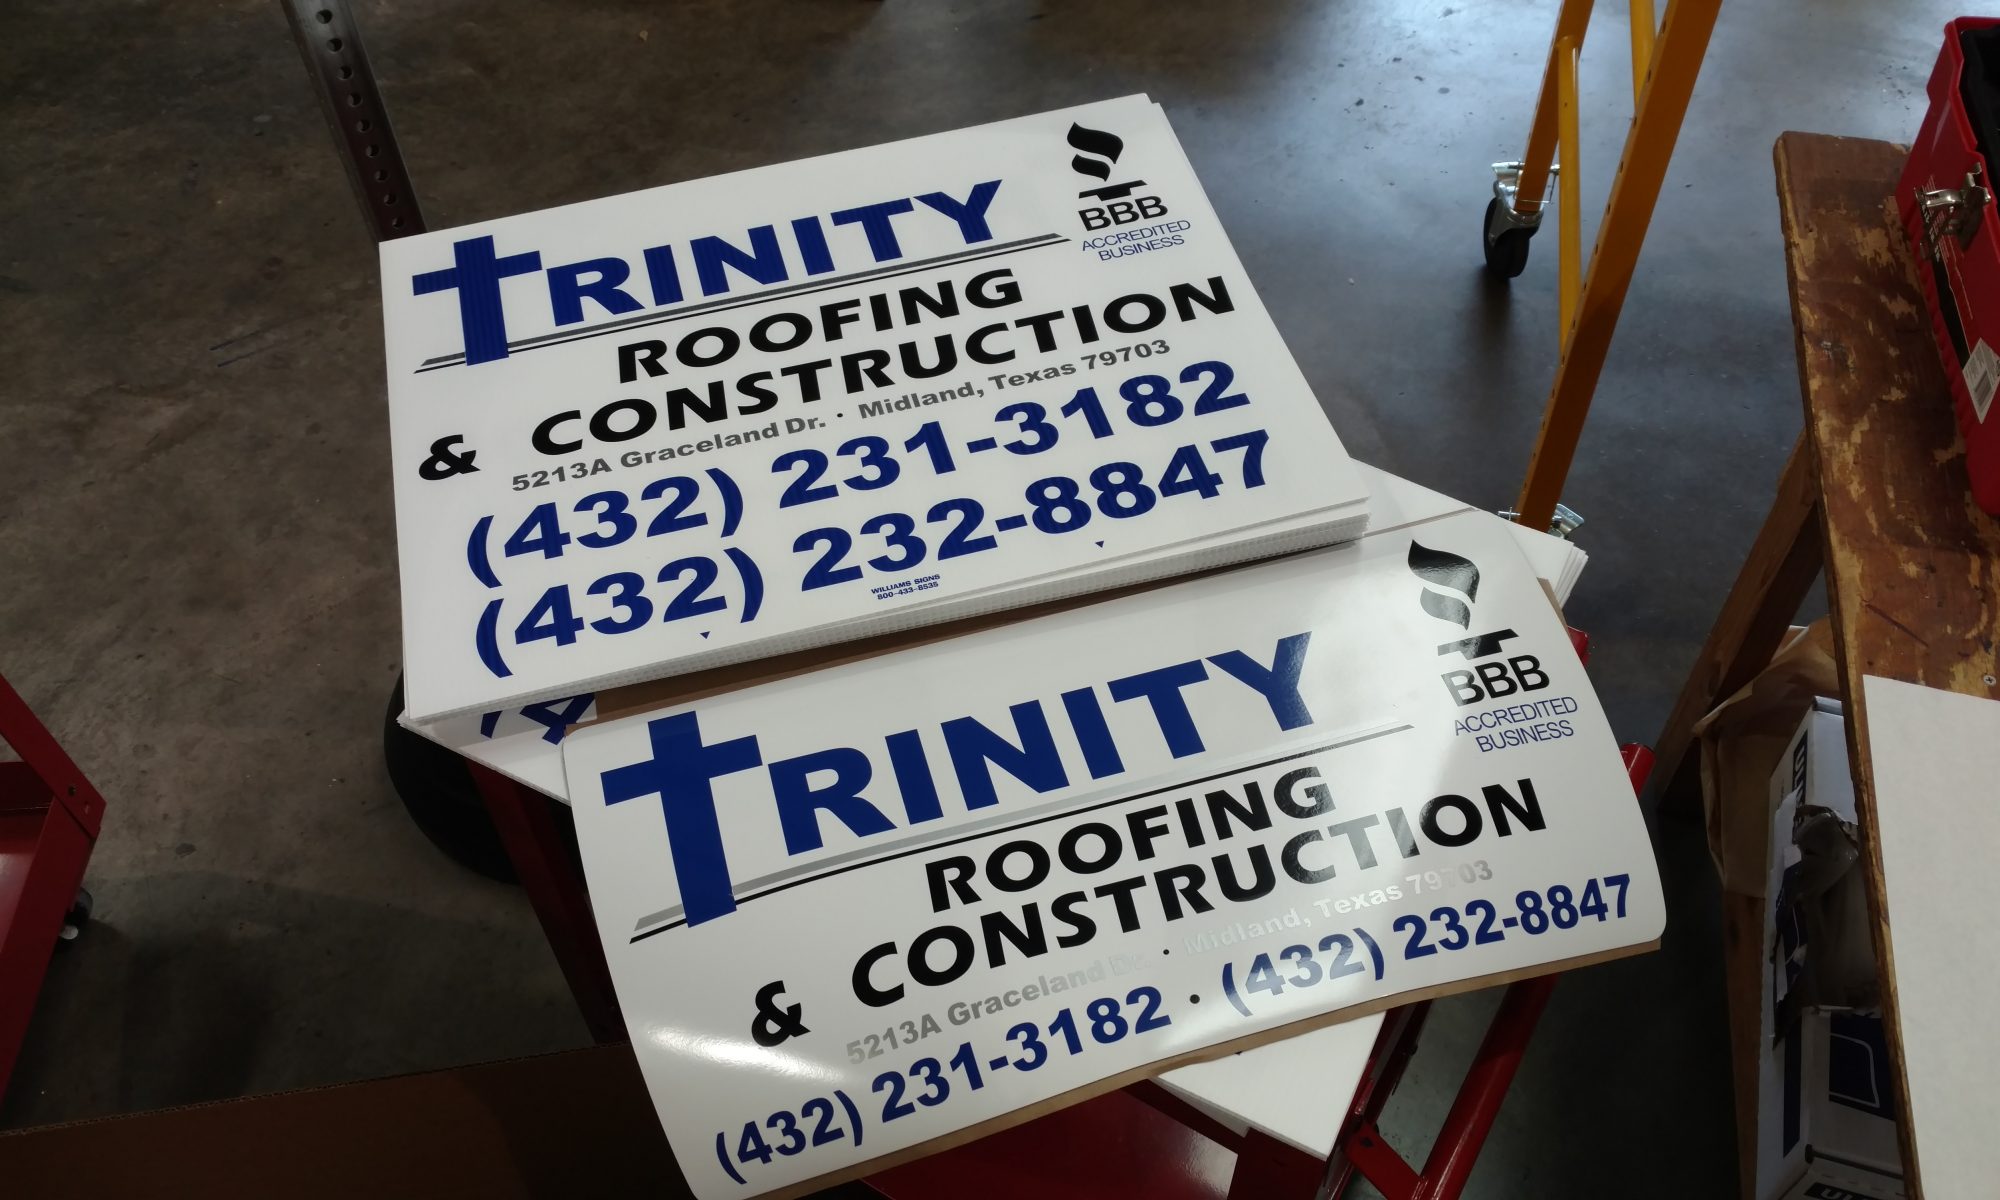 Car Magnets & Magnetic Signs Fortworth